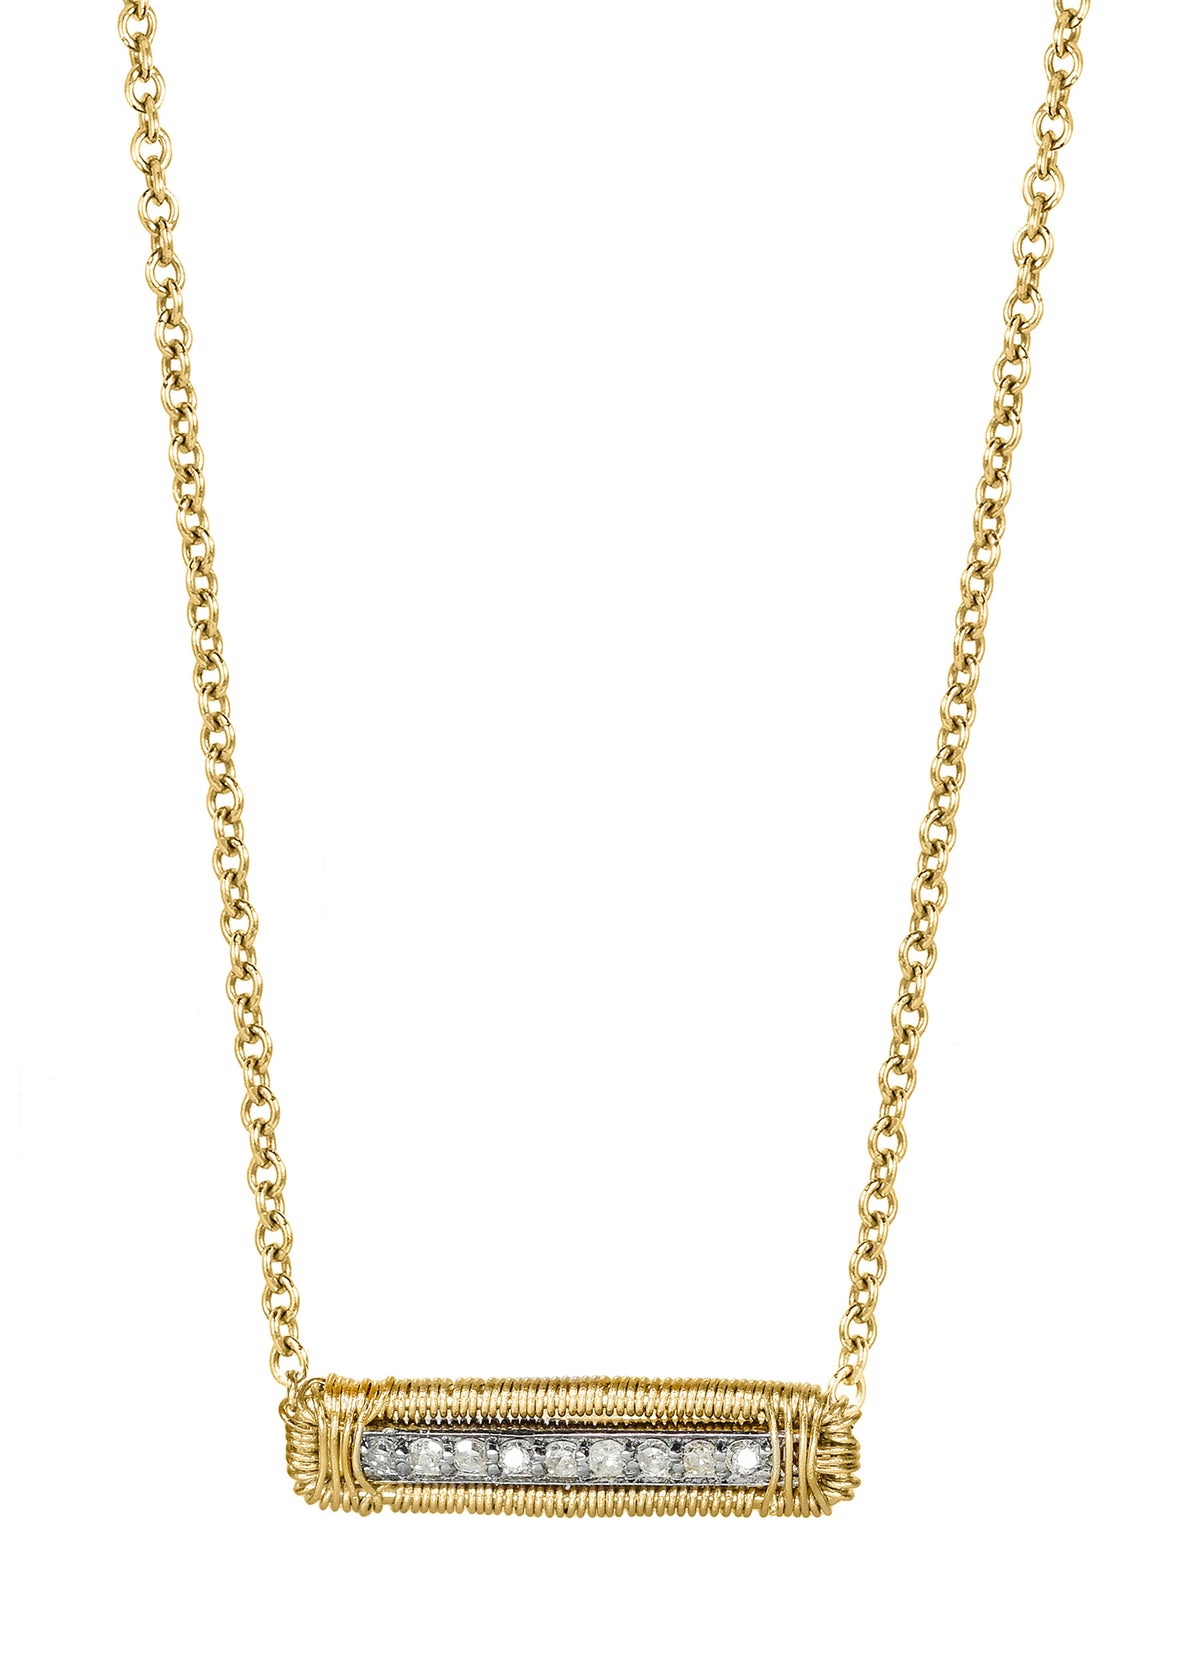 Diamond 14k gold Sterling silver Mixed metal Necklace measures 16&quot; in length Pendant measures 3/16&quot; in length and 5/8&quot; in width Handmade in our Los Angeles studio